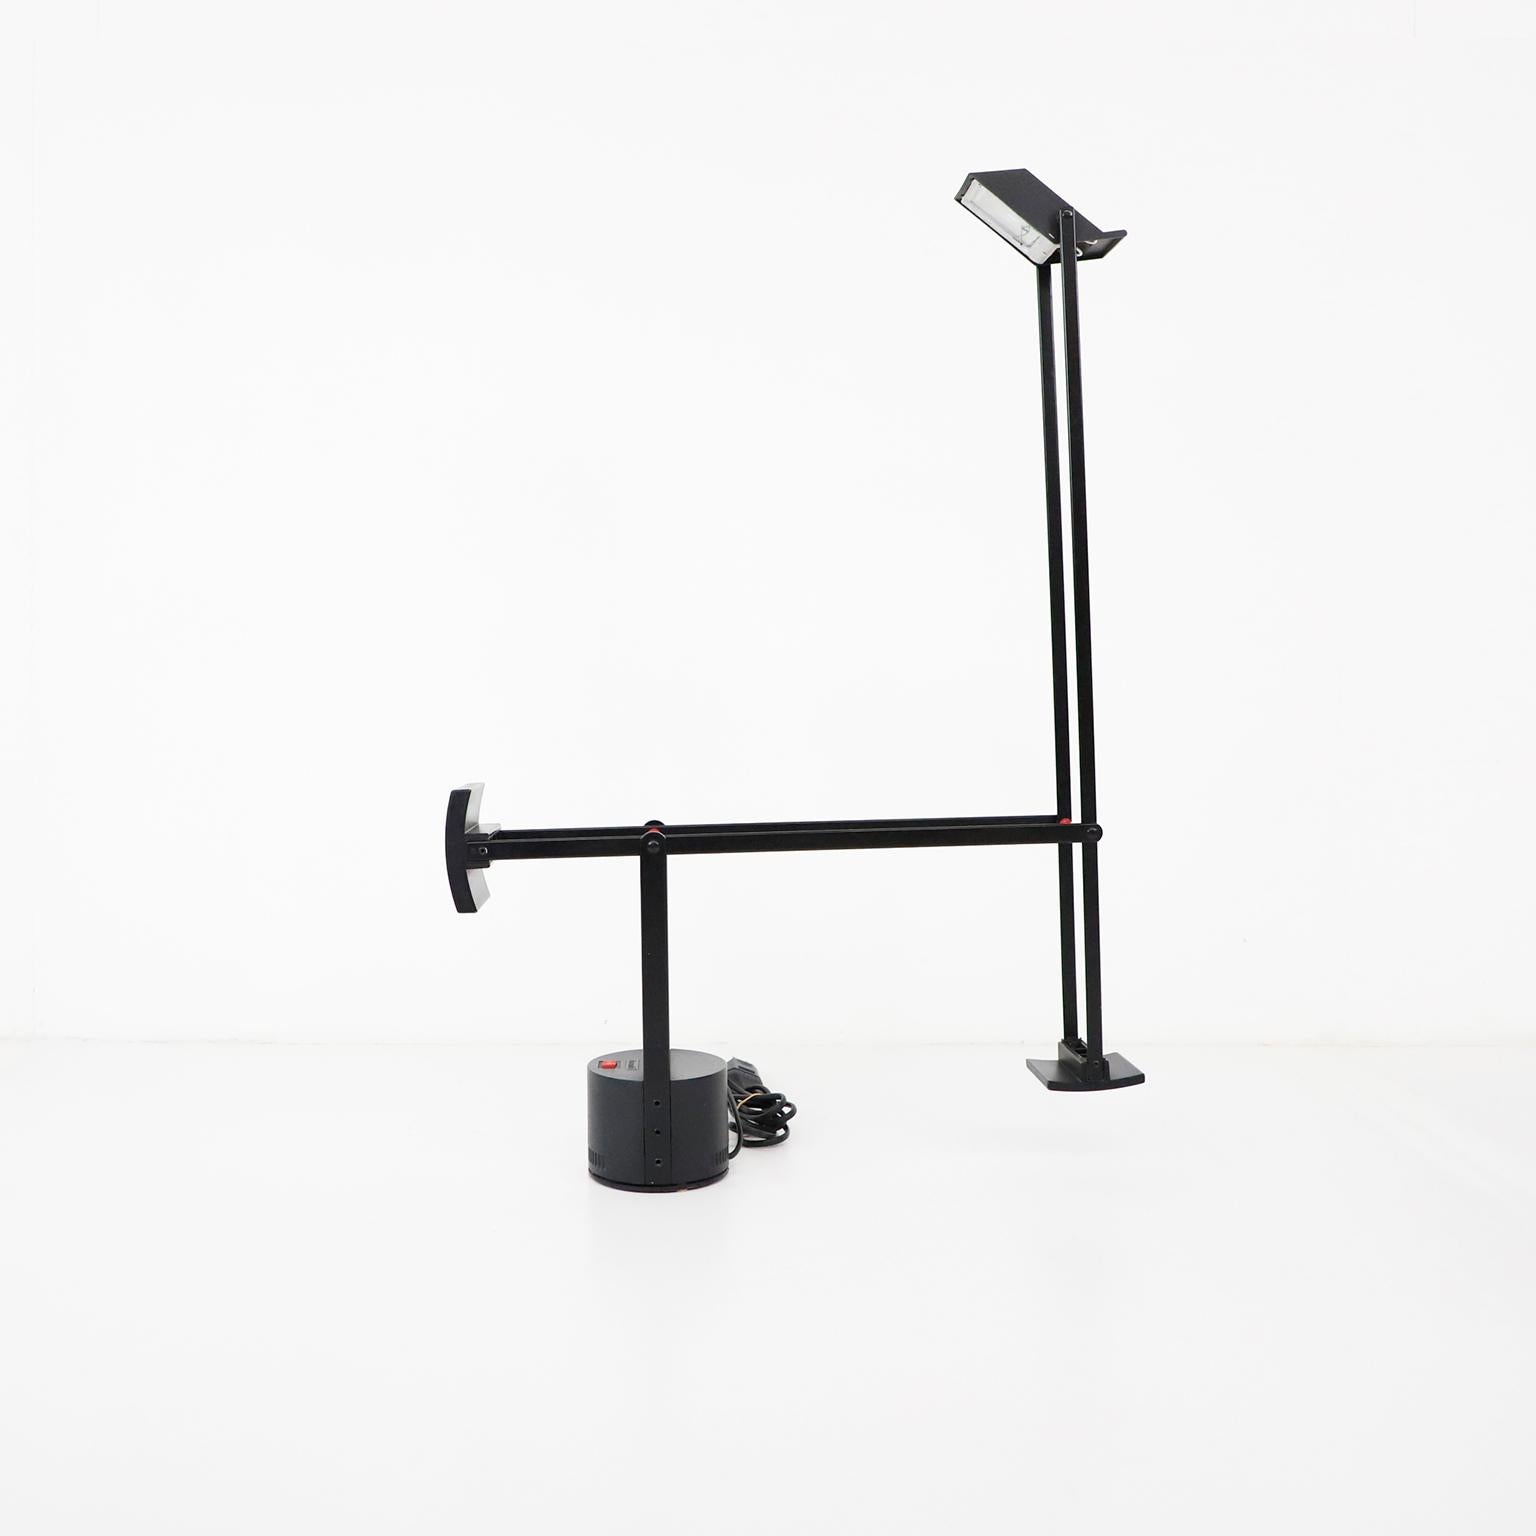 Designed by Richard Sapper for Artemide in 1972, the Tizio lamp is a true classic of modern design. Built with two counterweights to allow the user to direct the light where it’s needed, the lamp adjusts with a pull or push and stays in place